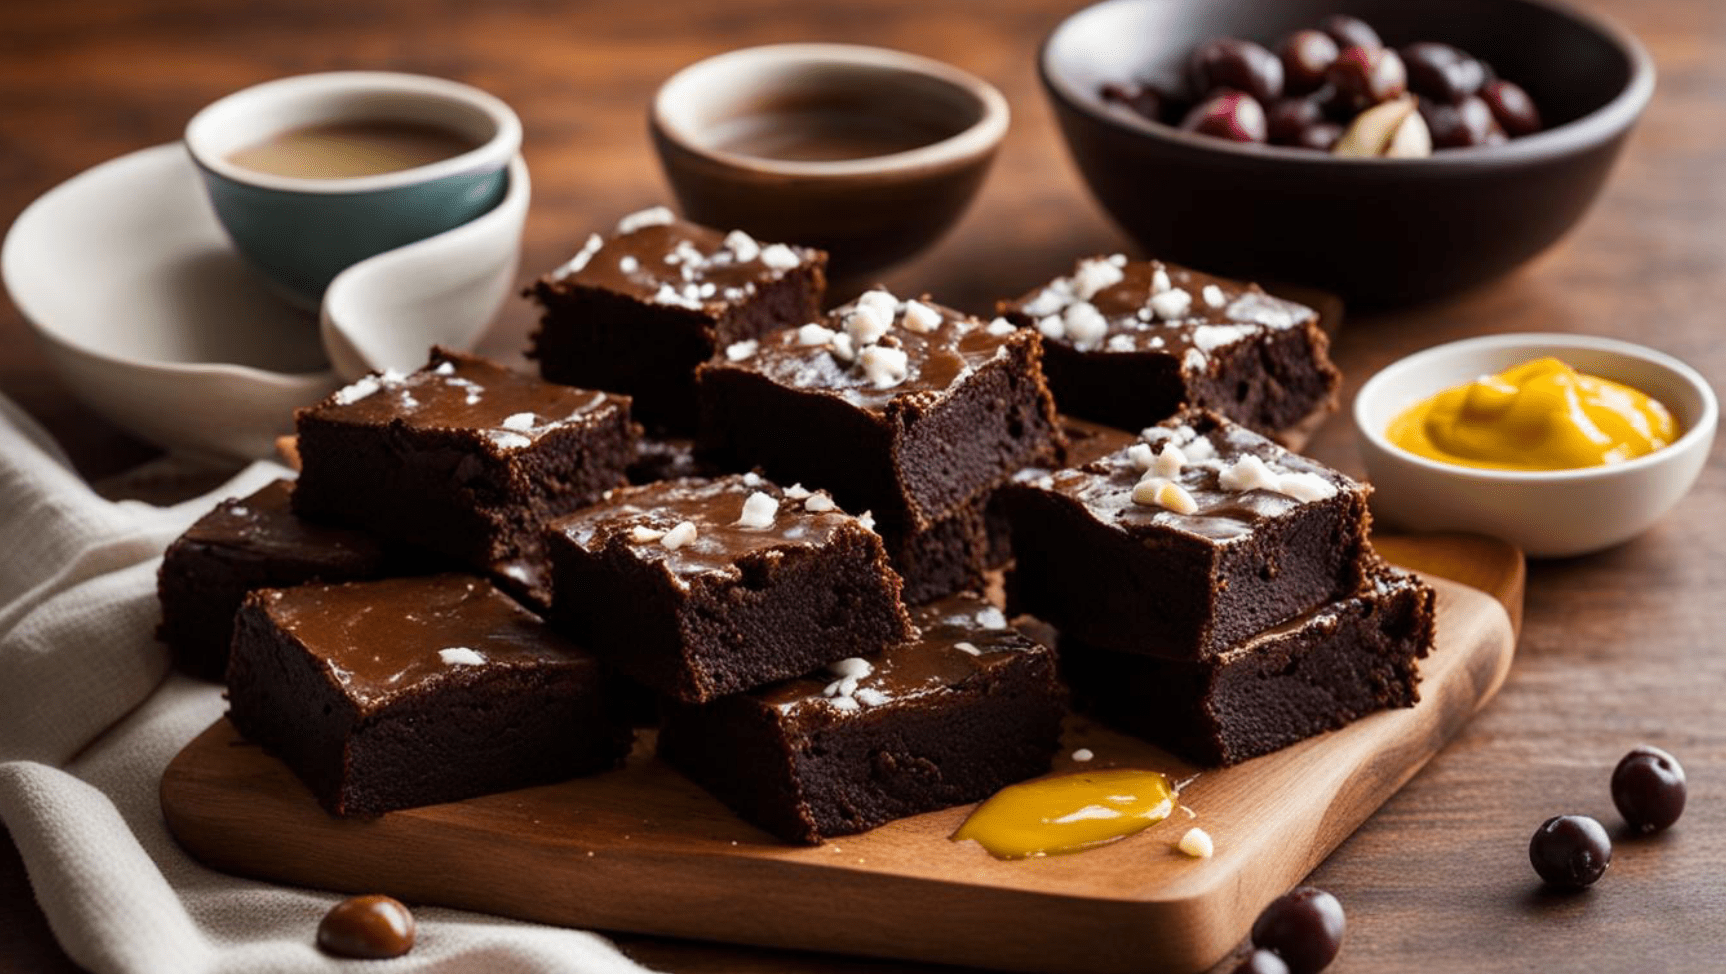 Discover "what can you substitute for vegetable oil in brownies?" Find healthy, flavorful alternatives to elevate your favorite treat’s taste and nutrition!